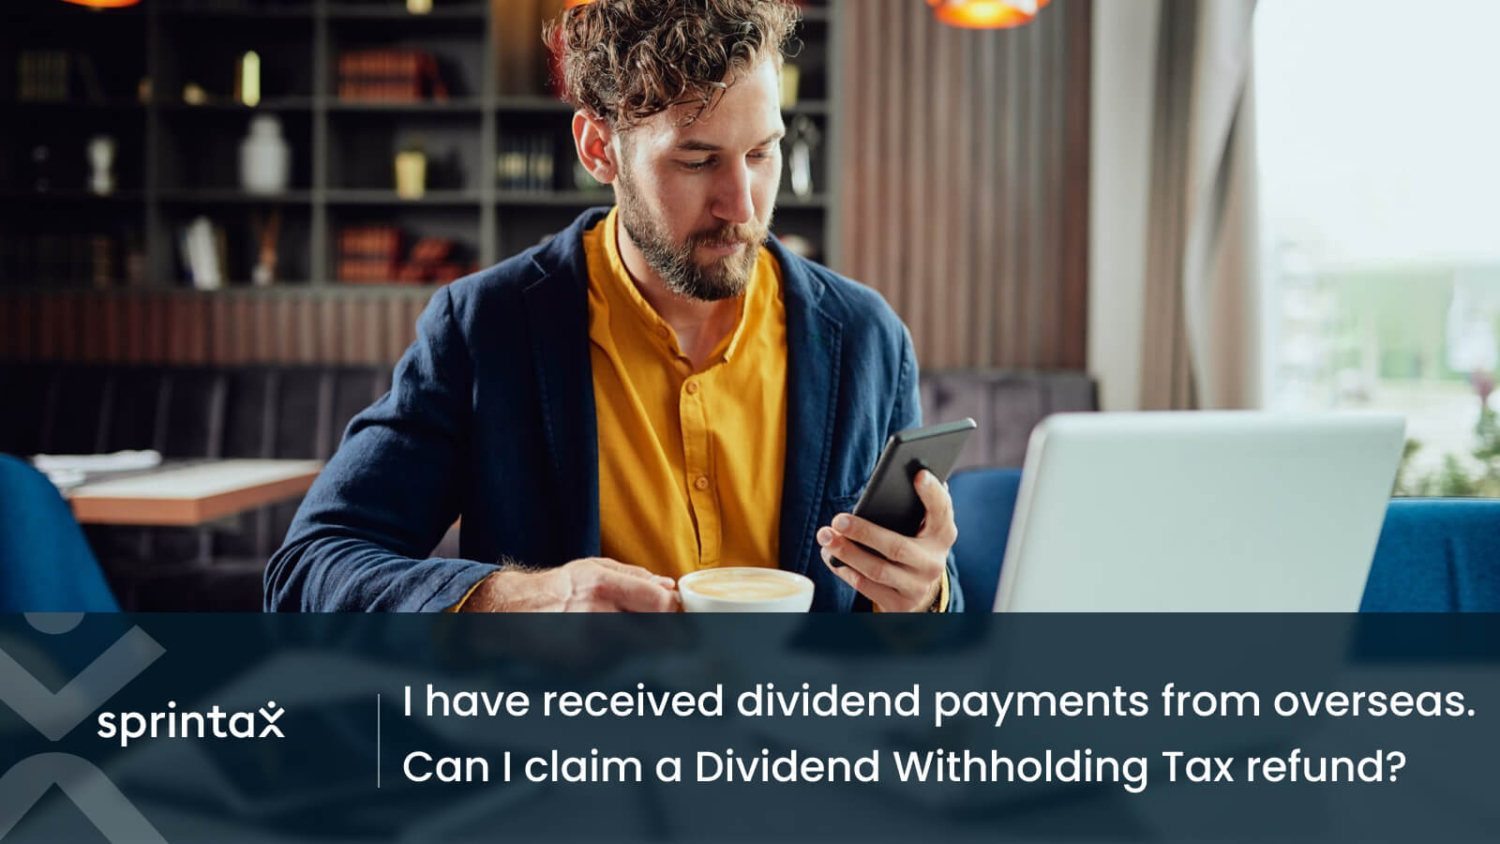 Claim dividend withholding tax refund